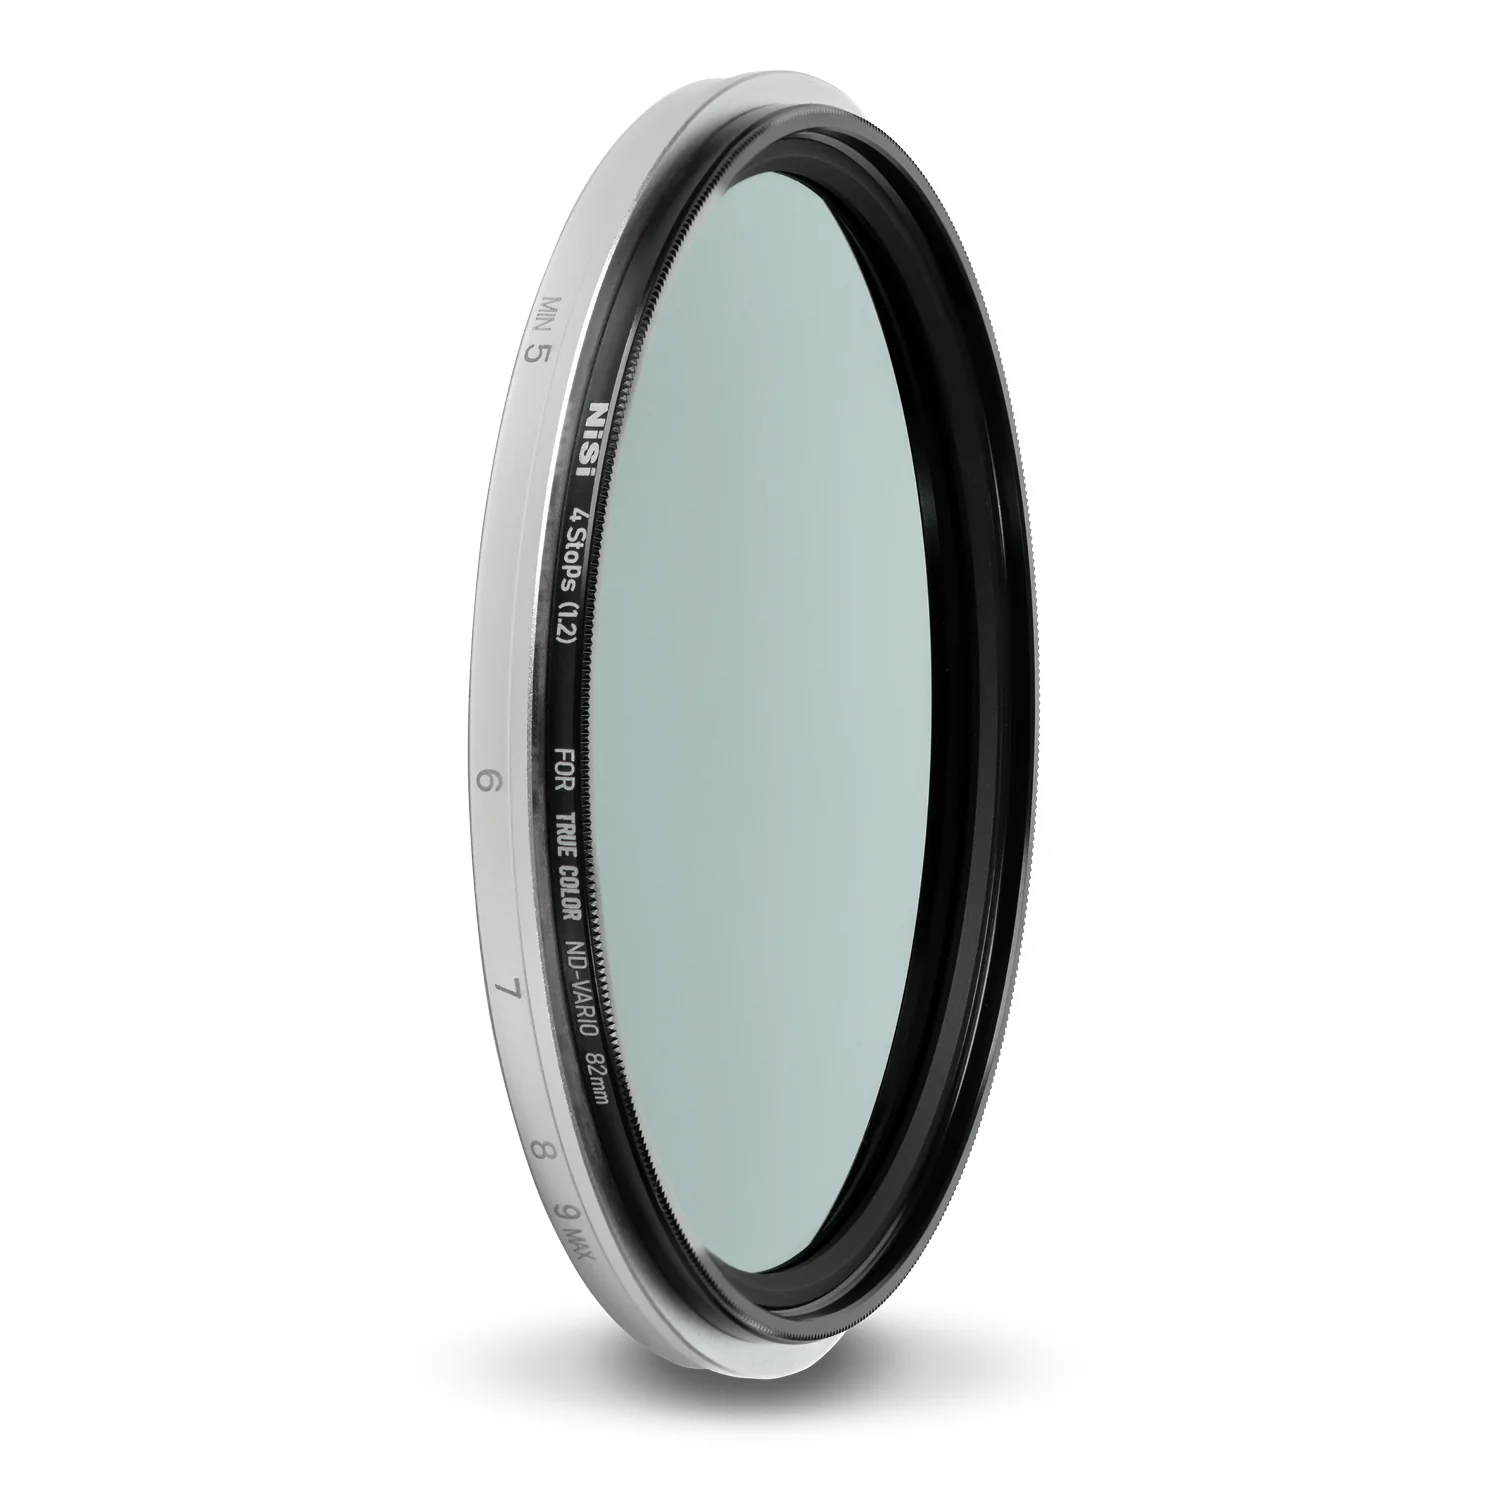 NiSi Filters 82mm Swift VND Kit